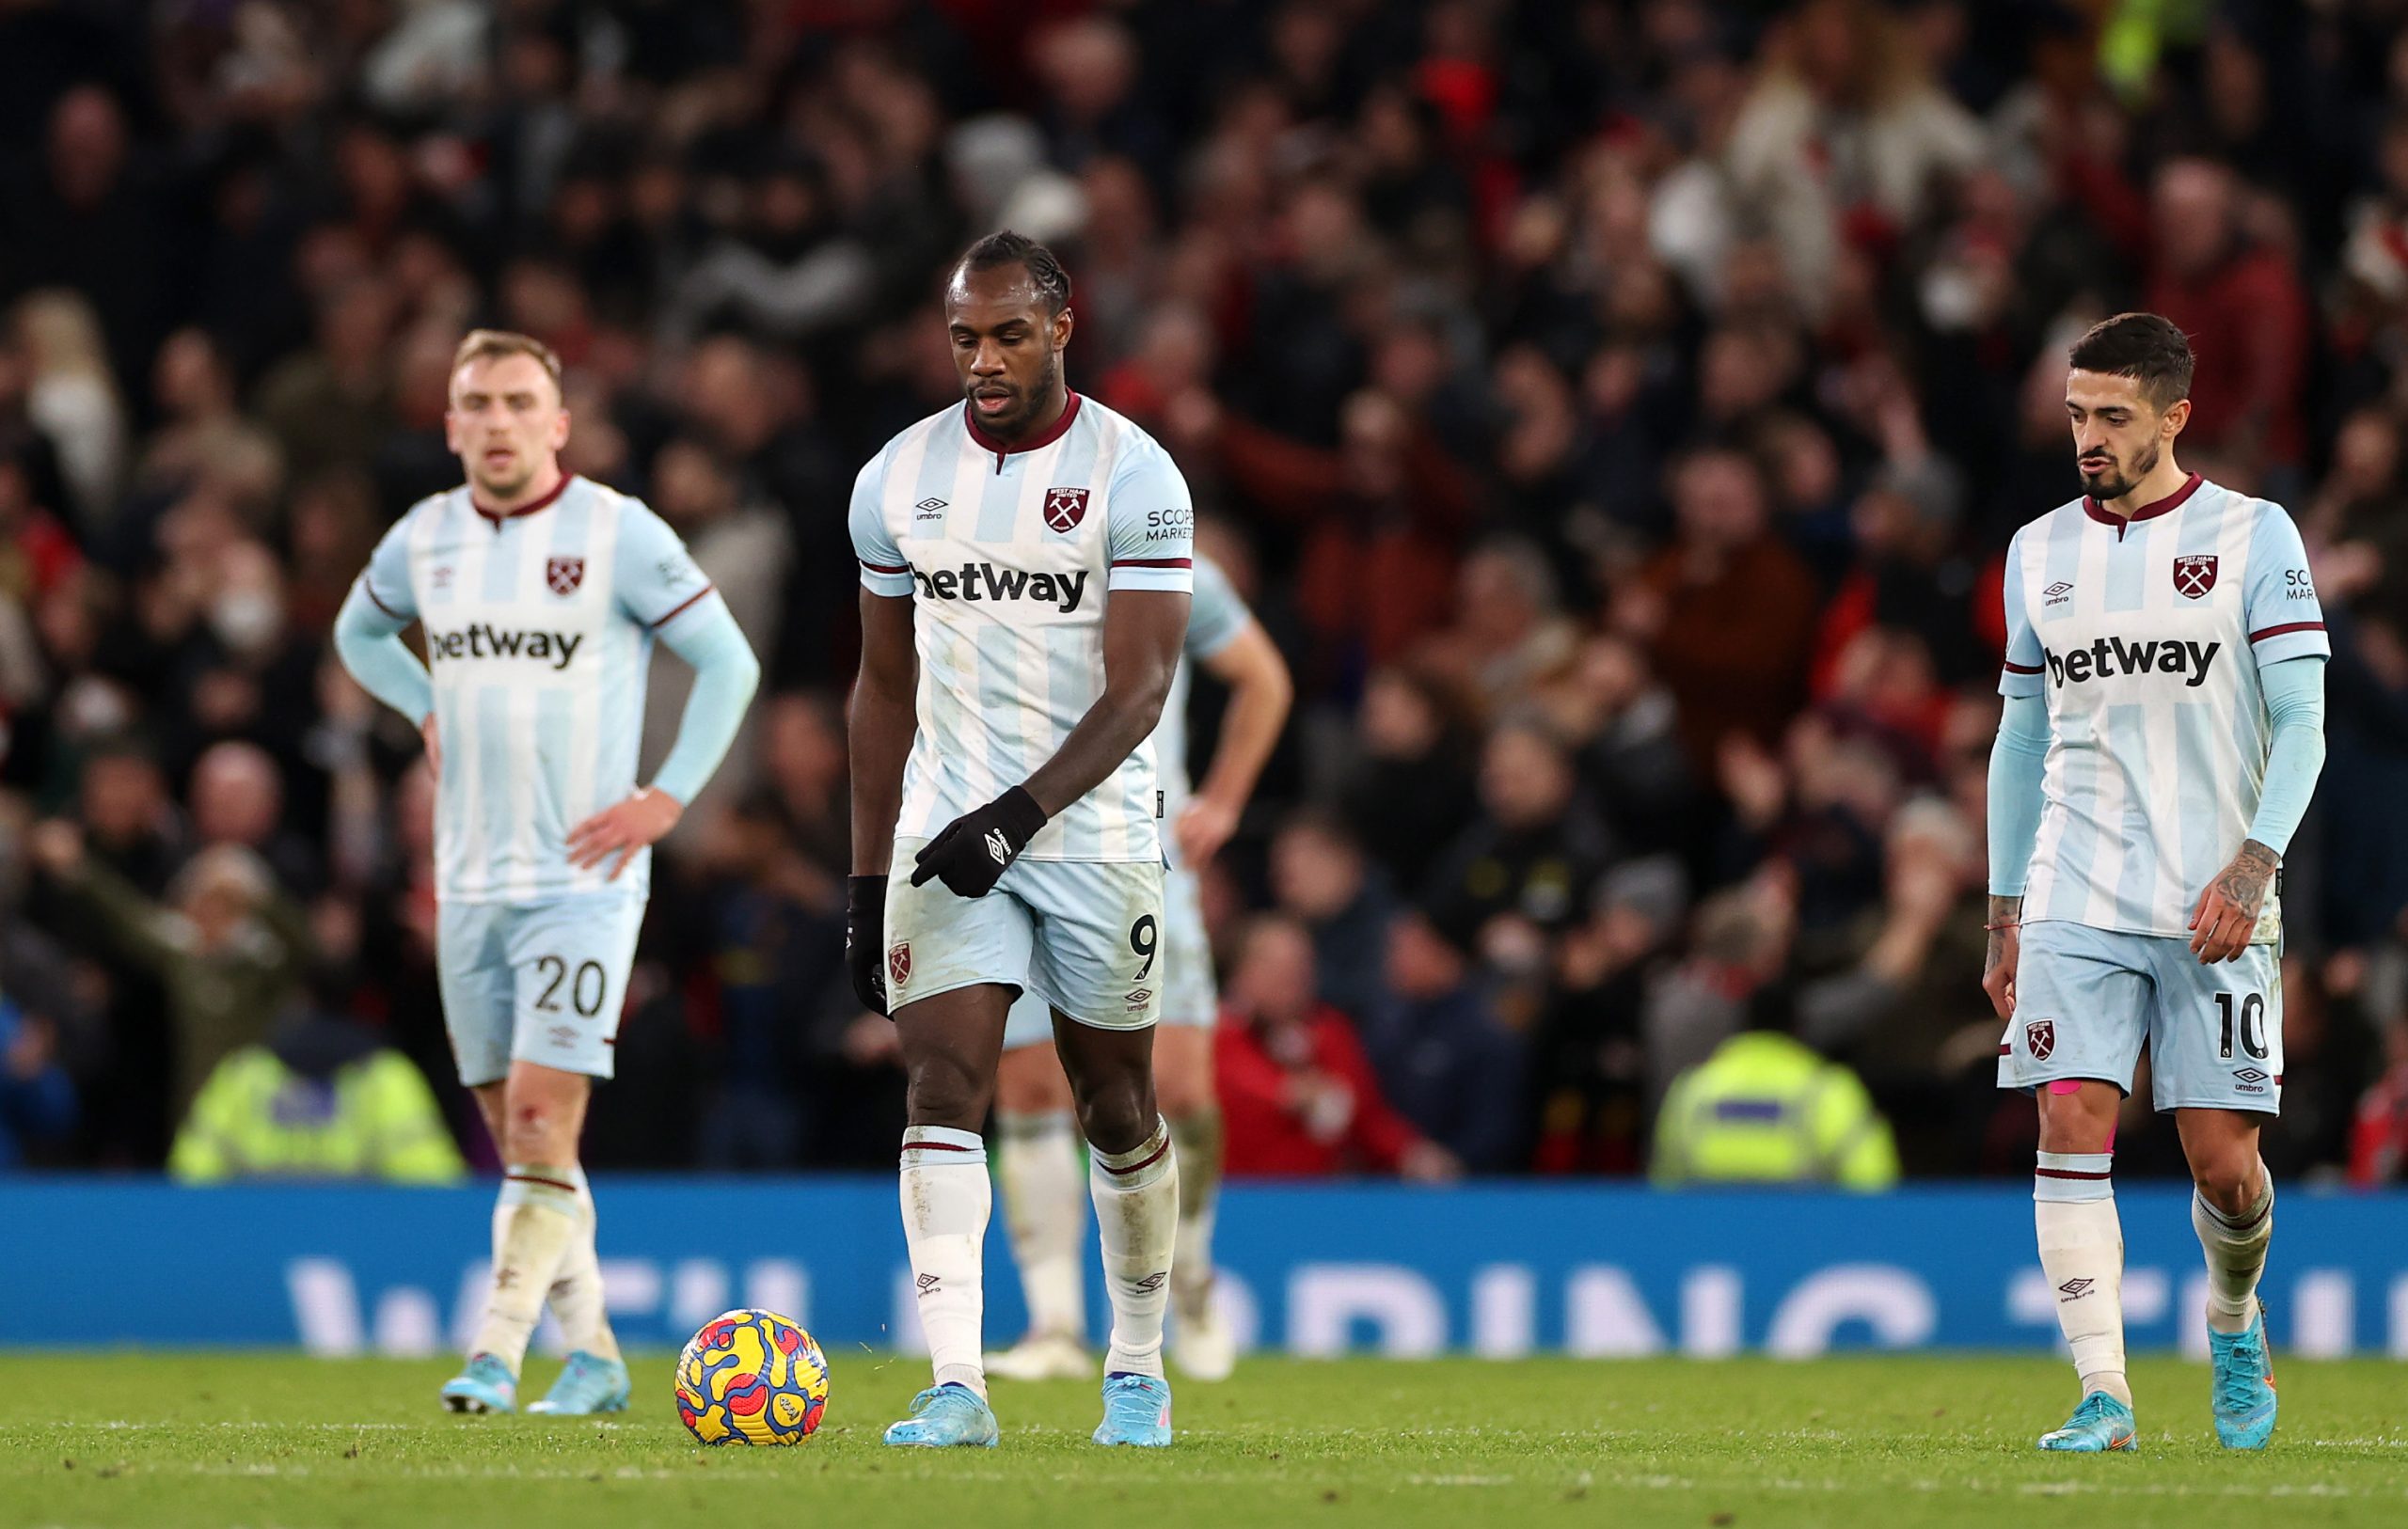 MANCHESTER, ENGLAND - JANUARY 22: Michail Antonio of West Ham United looks dejected following Manchester United's first goal during the Premier League match between Manchester United and West Ham United at Old Trafford on January 22, 2022 in Manchester, England. (Photo by Naomi Baker/Getty Images)The 4th Official uses images provided by the following image agency: Getty Images (https://www.gettyimages.de/) Imago Images (https://www.imago-images.de/)